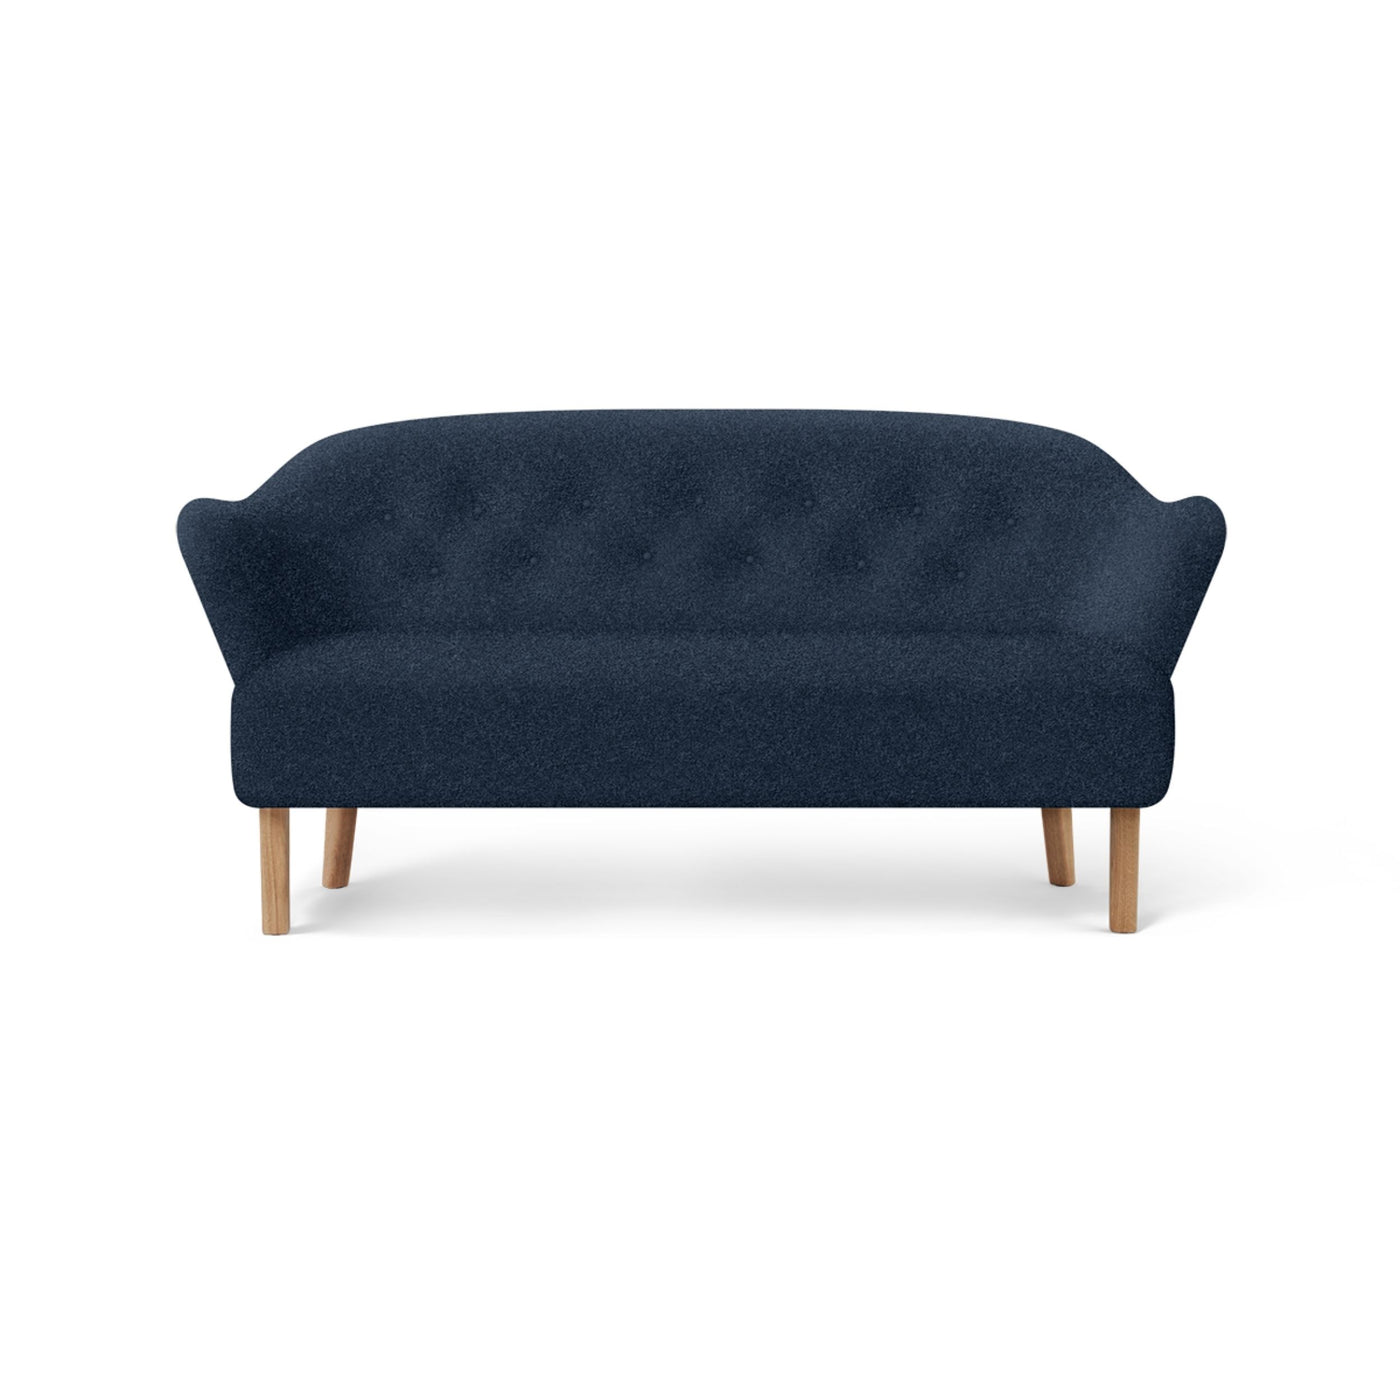 By Lassen Ingeborg sofa with natural oak legs. Made to order from someday designs. #colour_sahco-zero-6